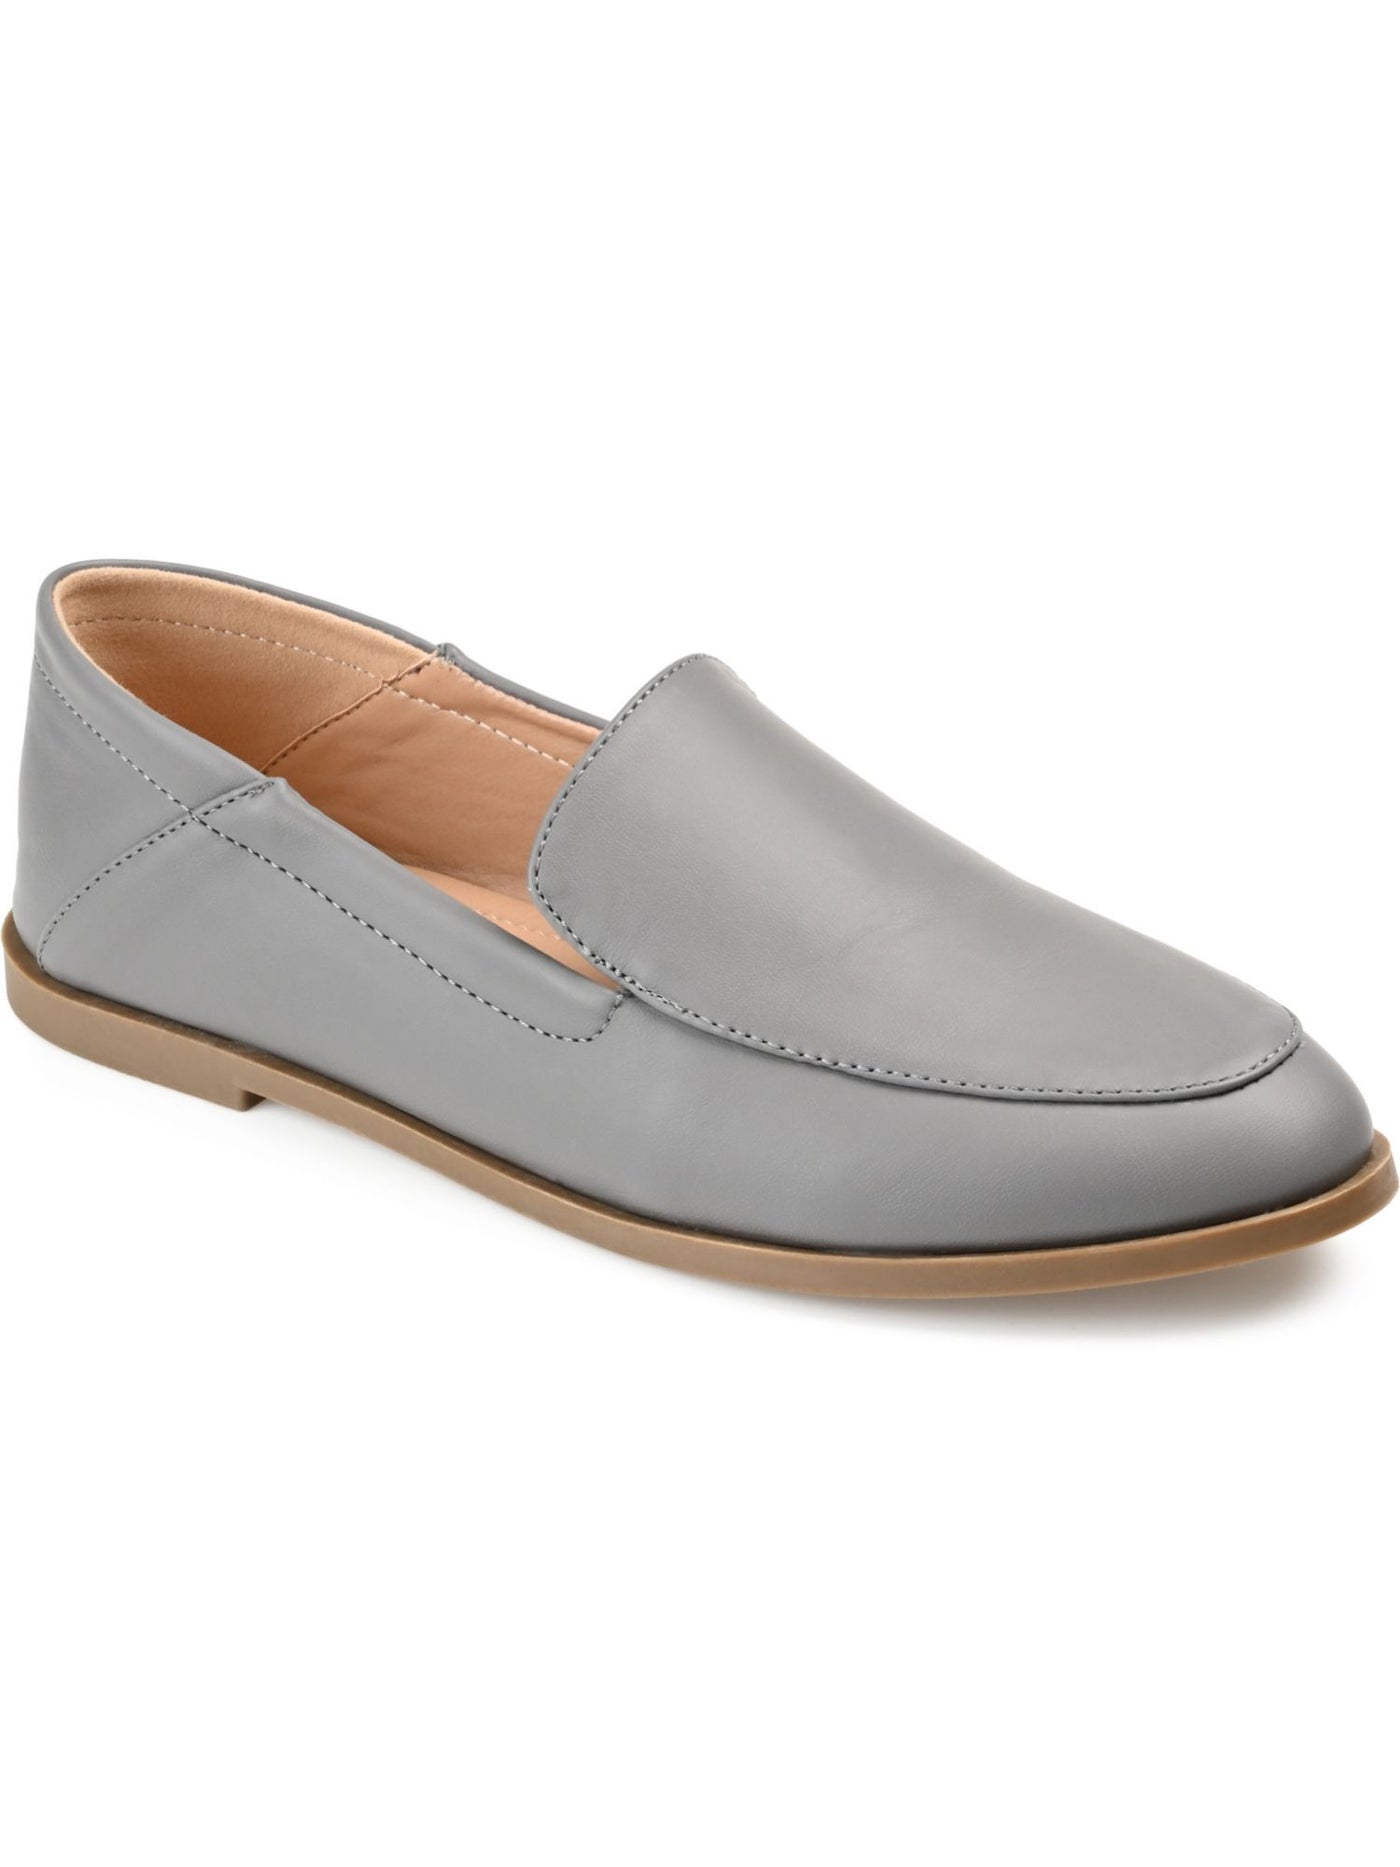 JOURNEE COLLECTION Womens Gray Cushioned Corinne Almond Toe Slip On Loafers Shoes 9